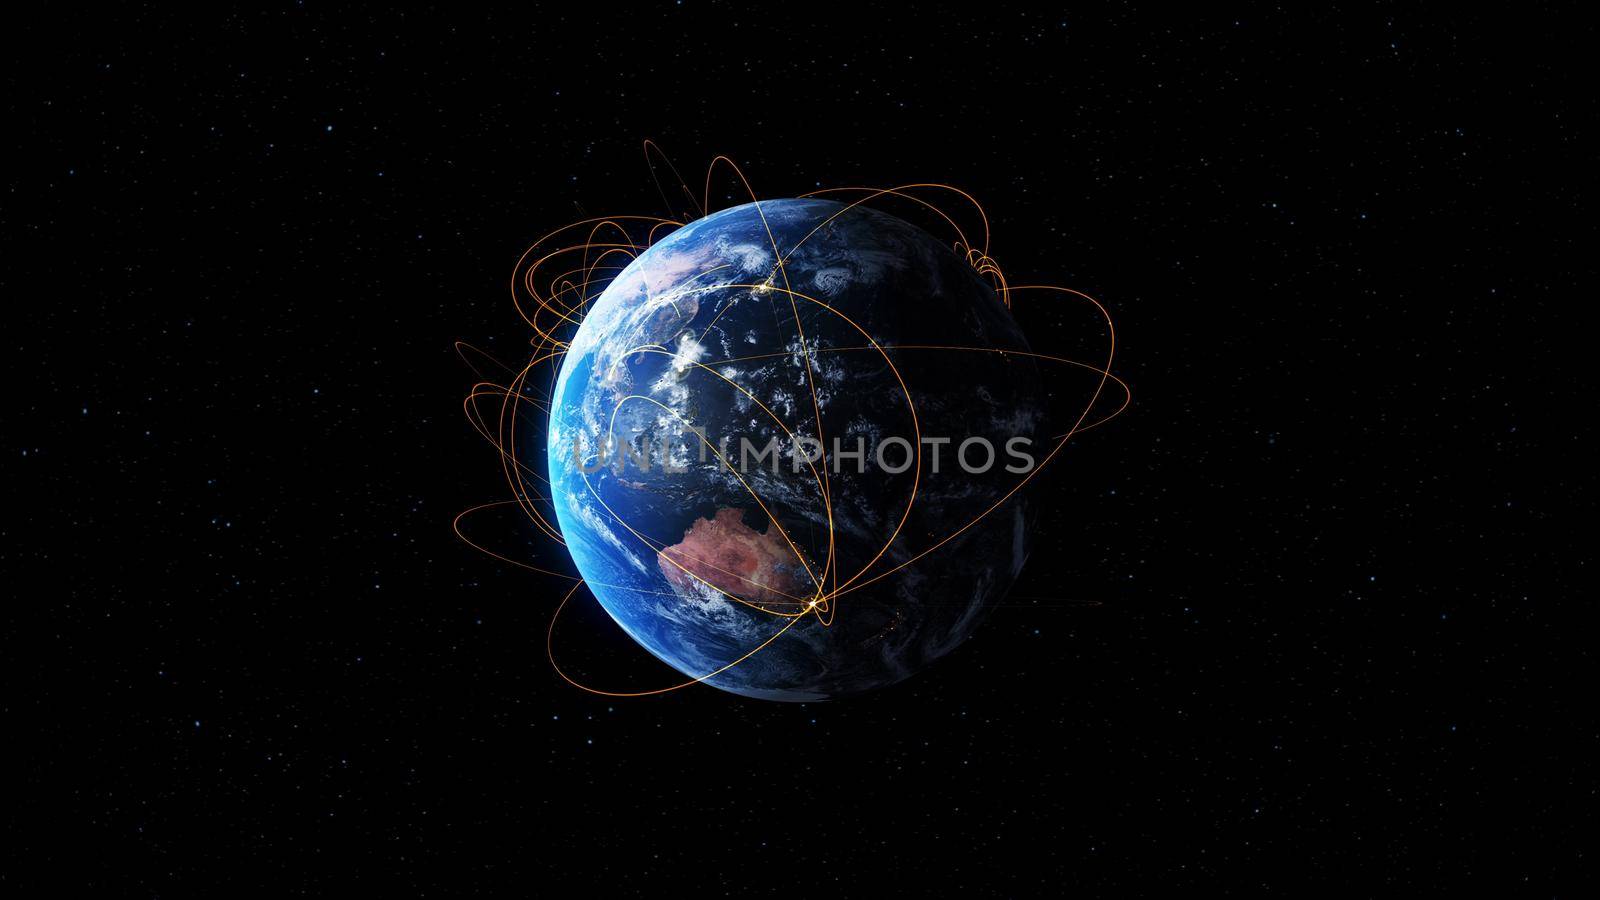 Global network and internet connection in orbital earth globe by biancoblue